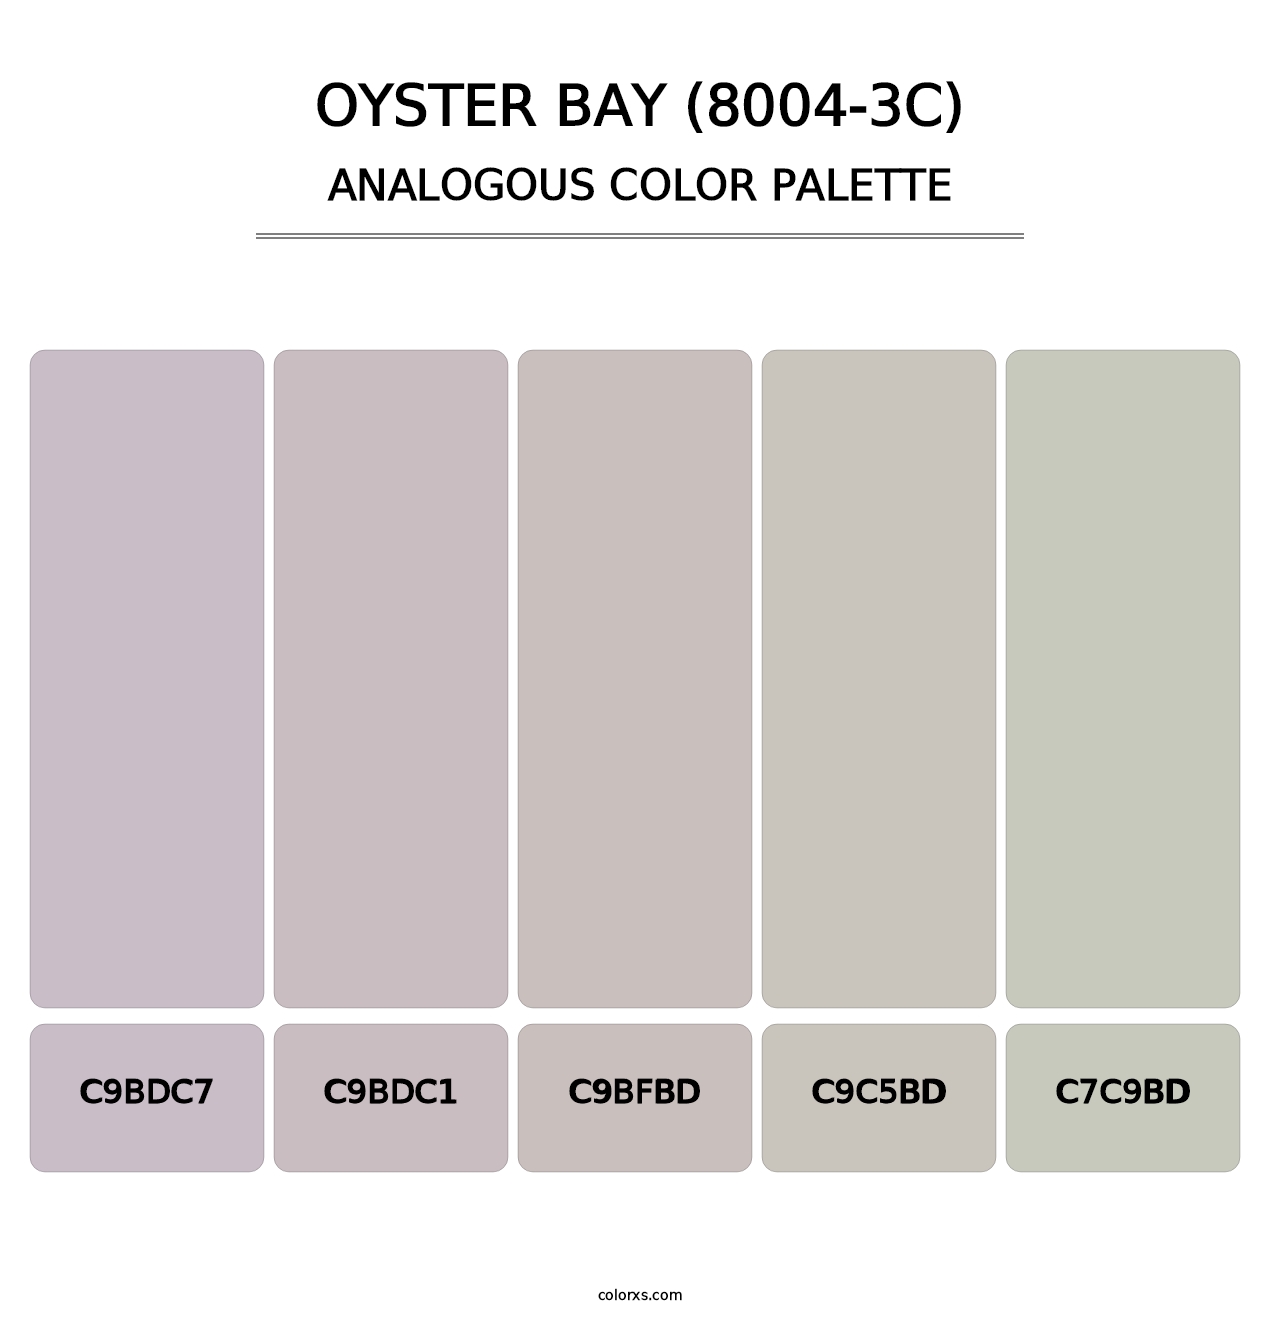 Oyster Bay (8004-3C) - Analogous Color Palette